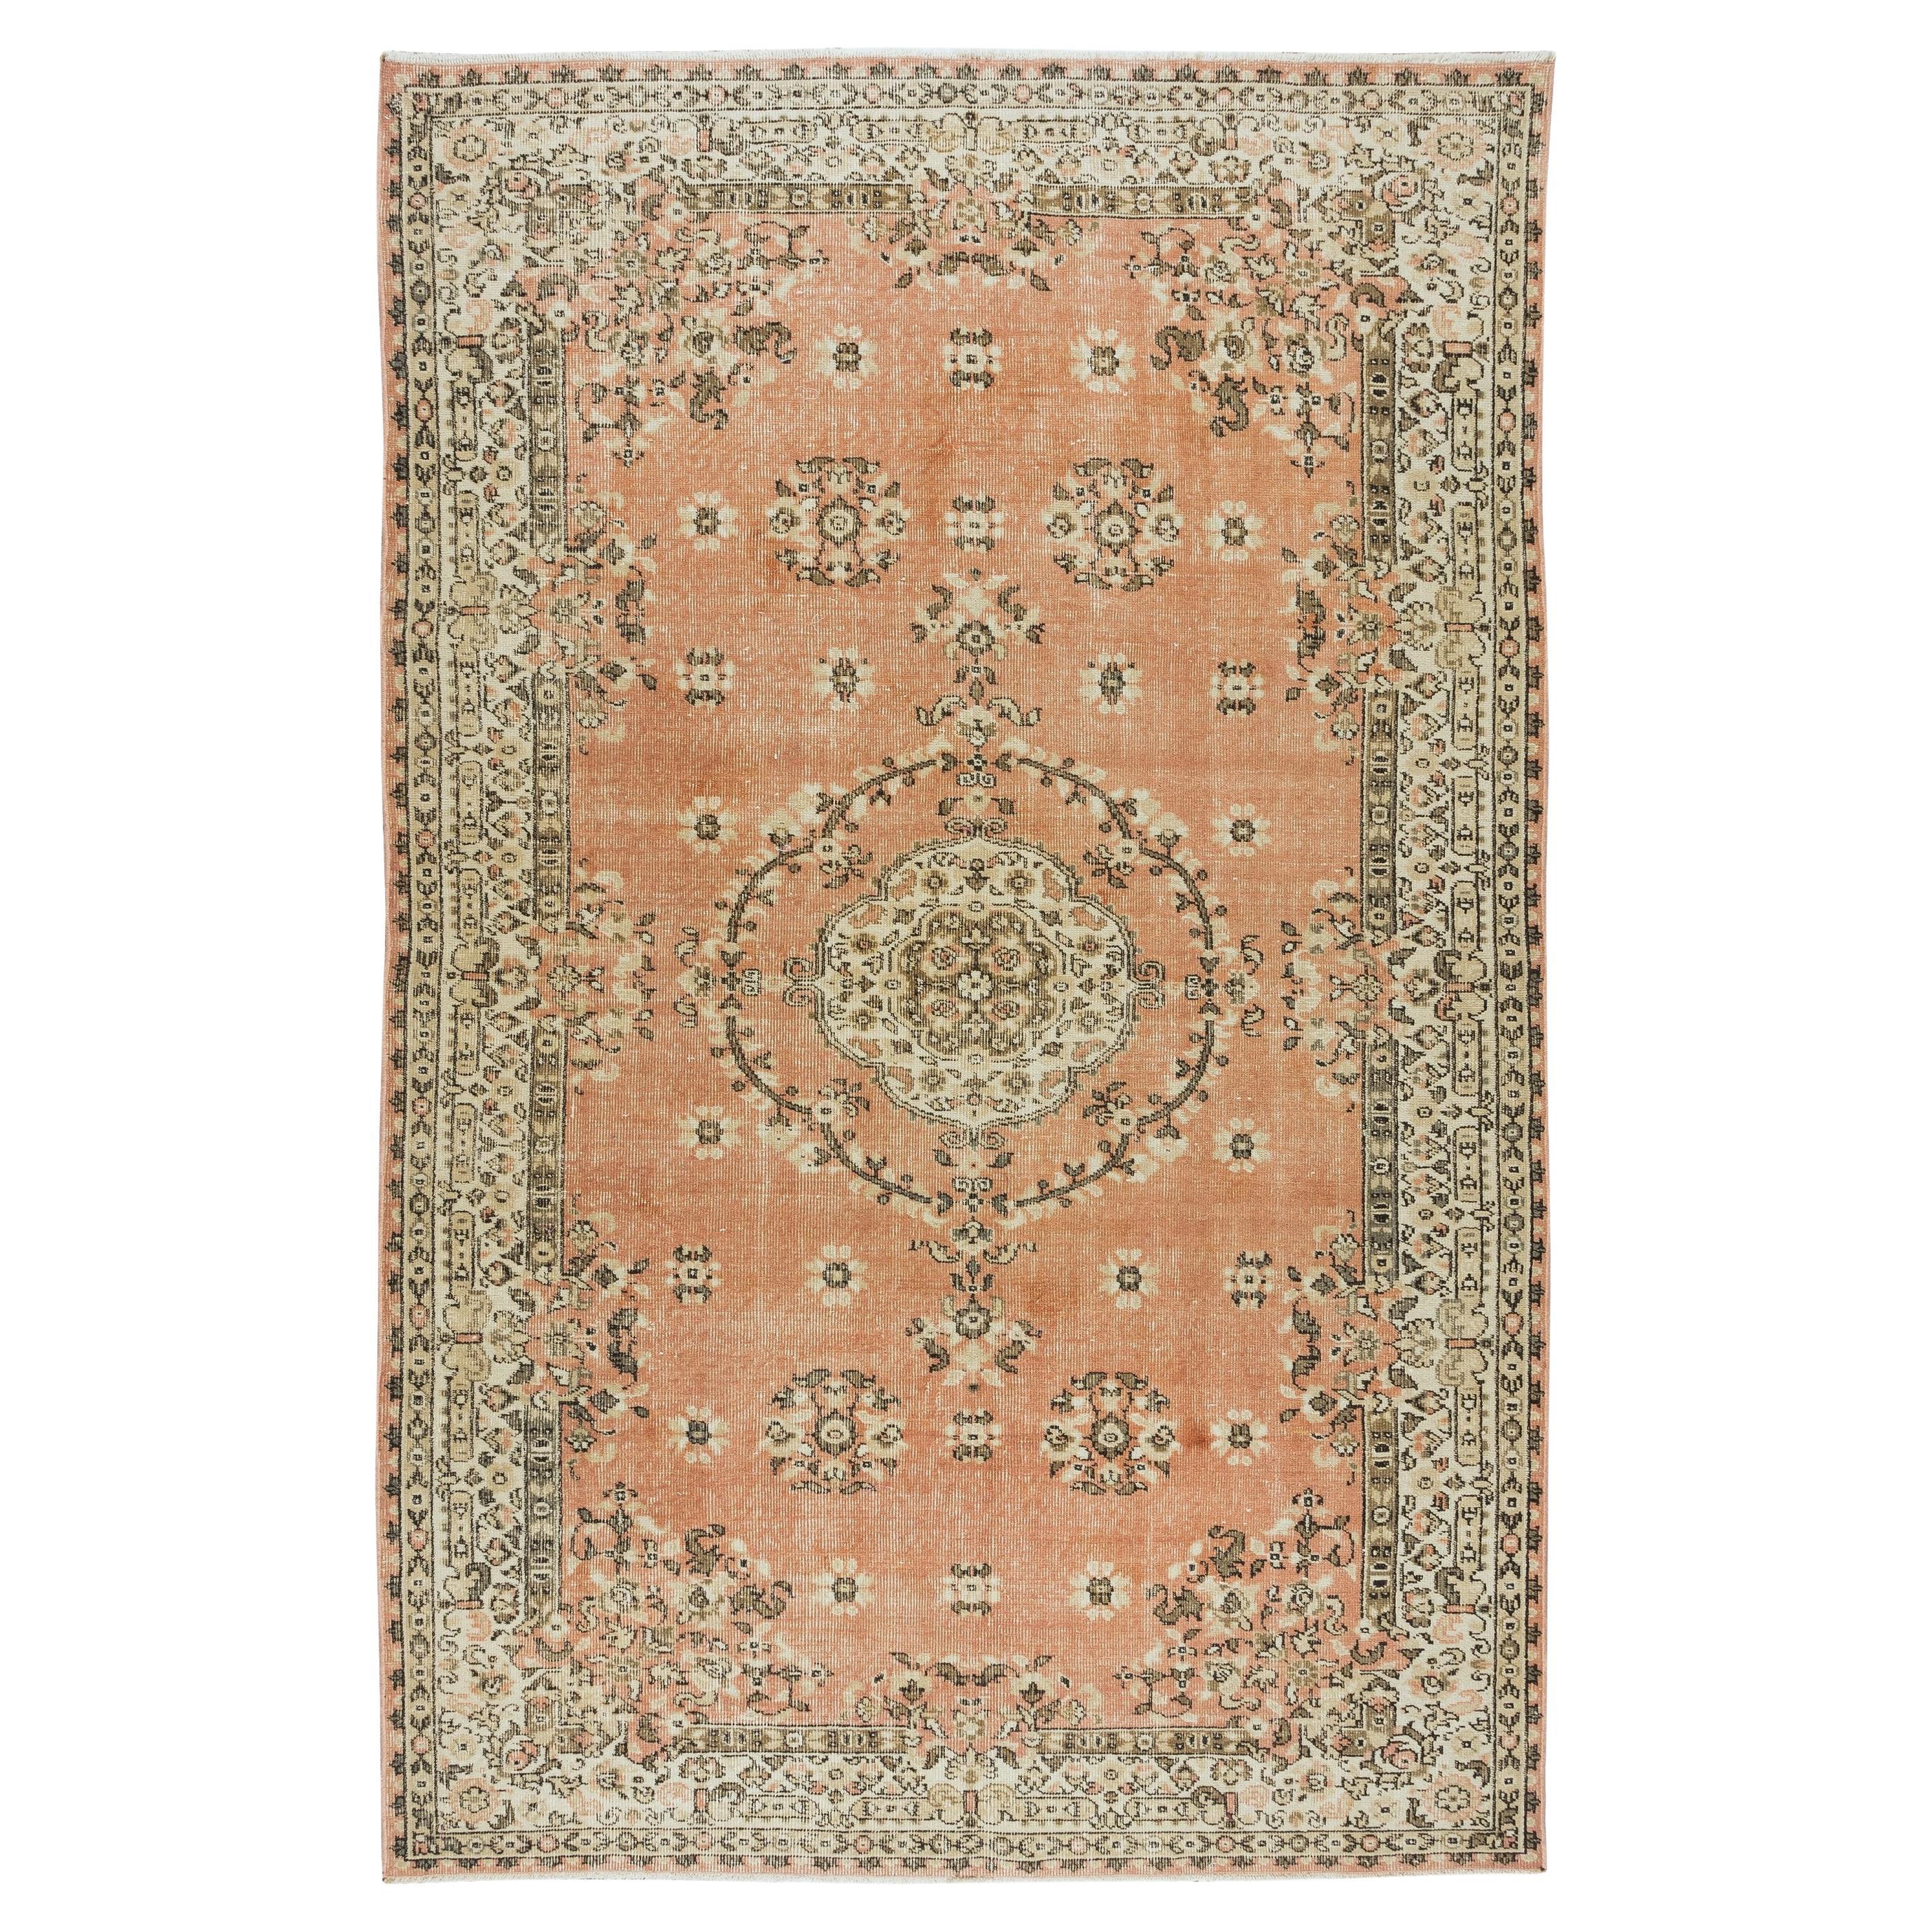 6x9.2 Ft Hand-Knotted Medallion Design Vintage Turkish Area Rug in Red and Beige